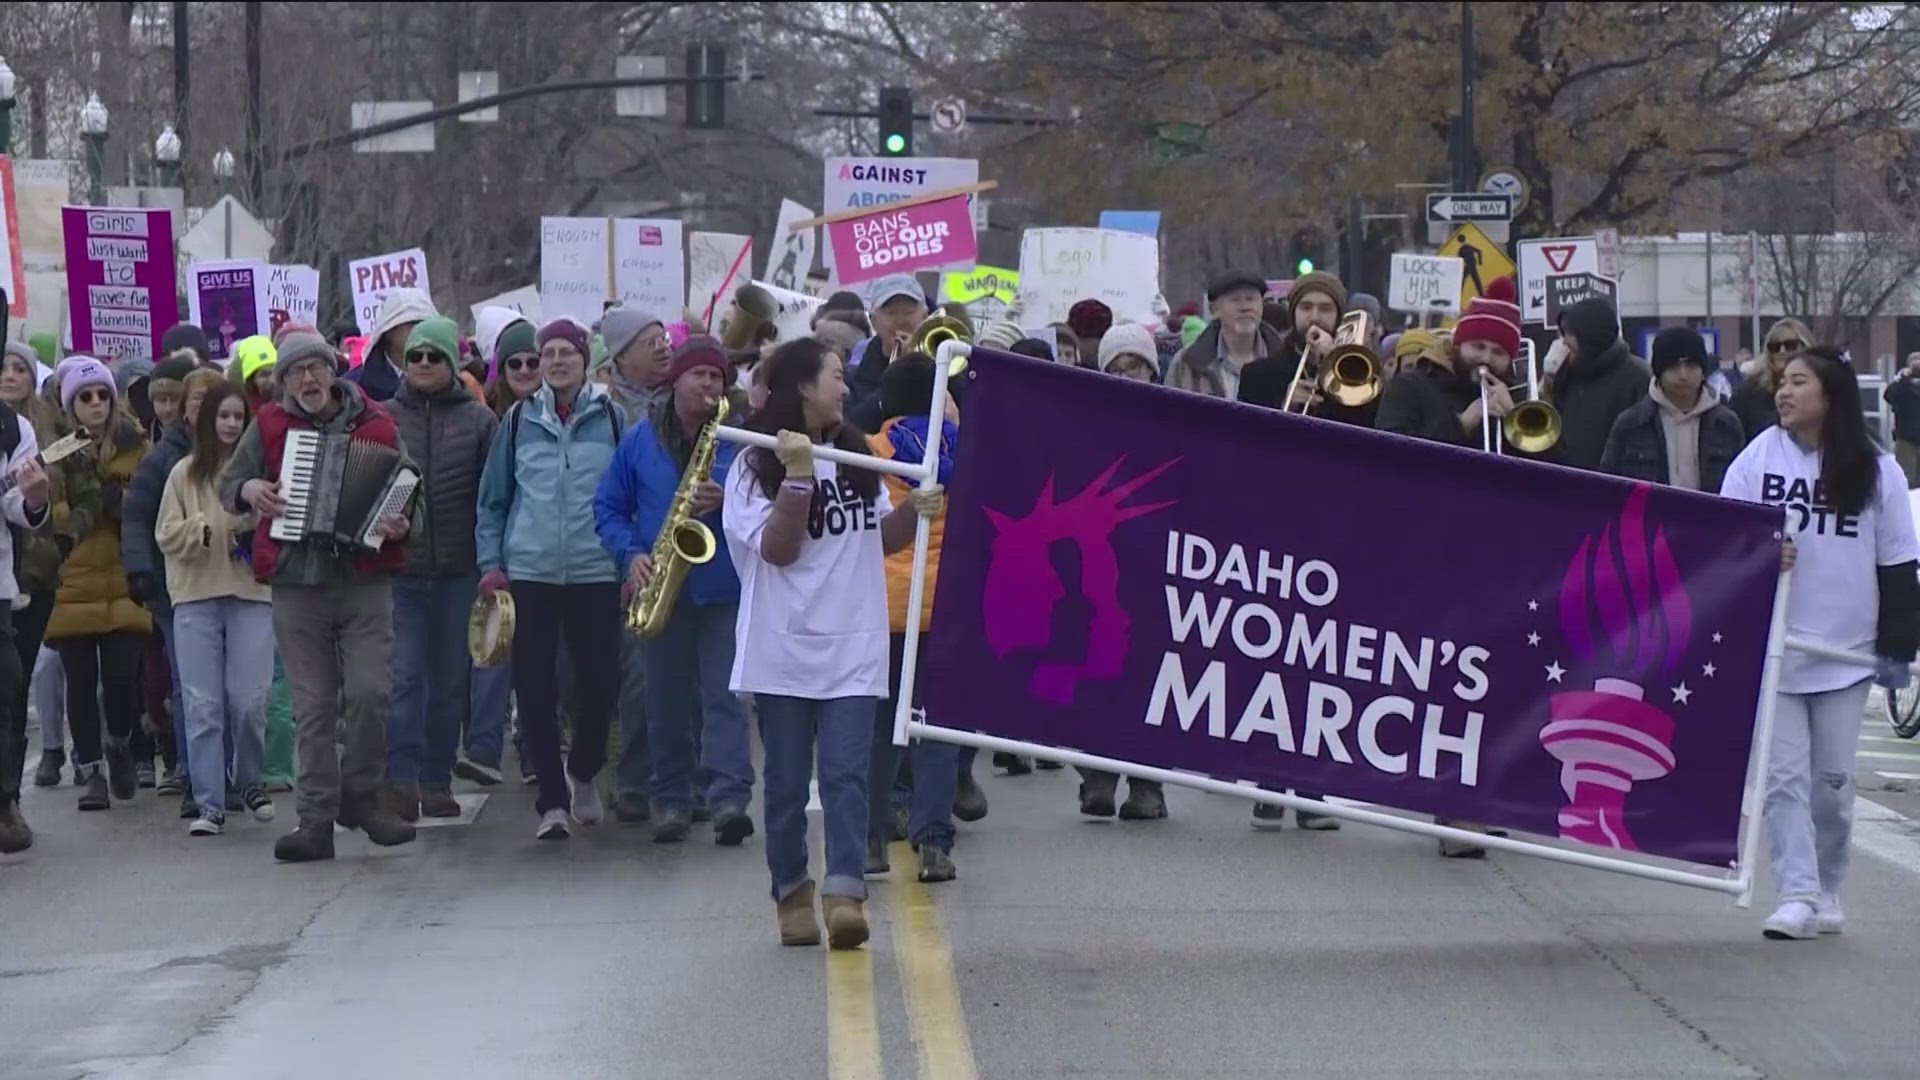 The Idaho Women's March and Boise March for Life took place Saturday, the weekend Roe V. Wade was enacted